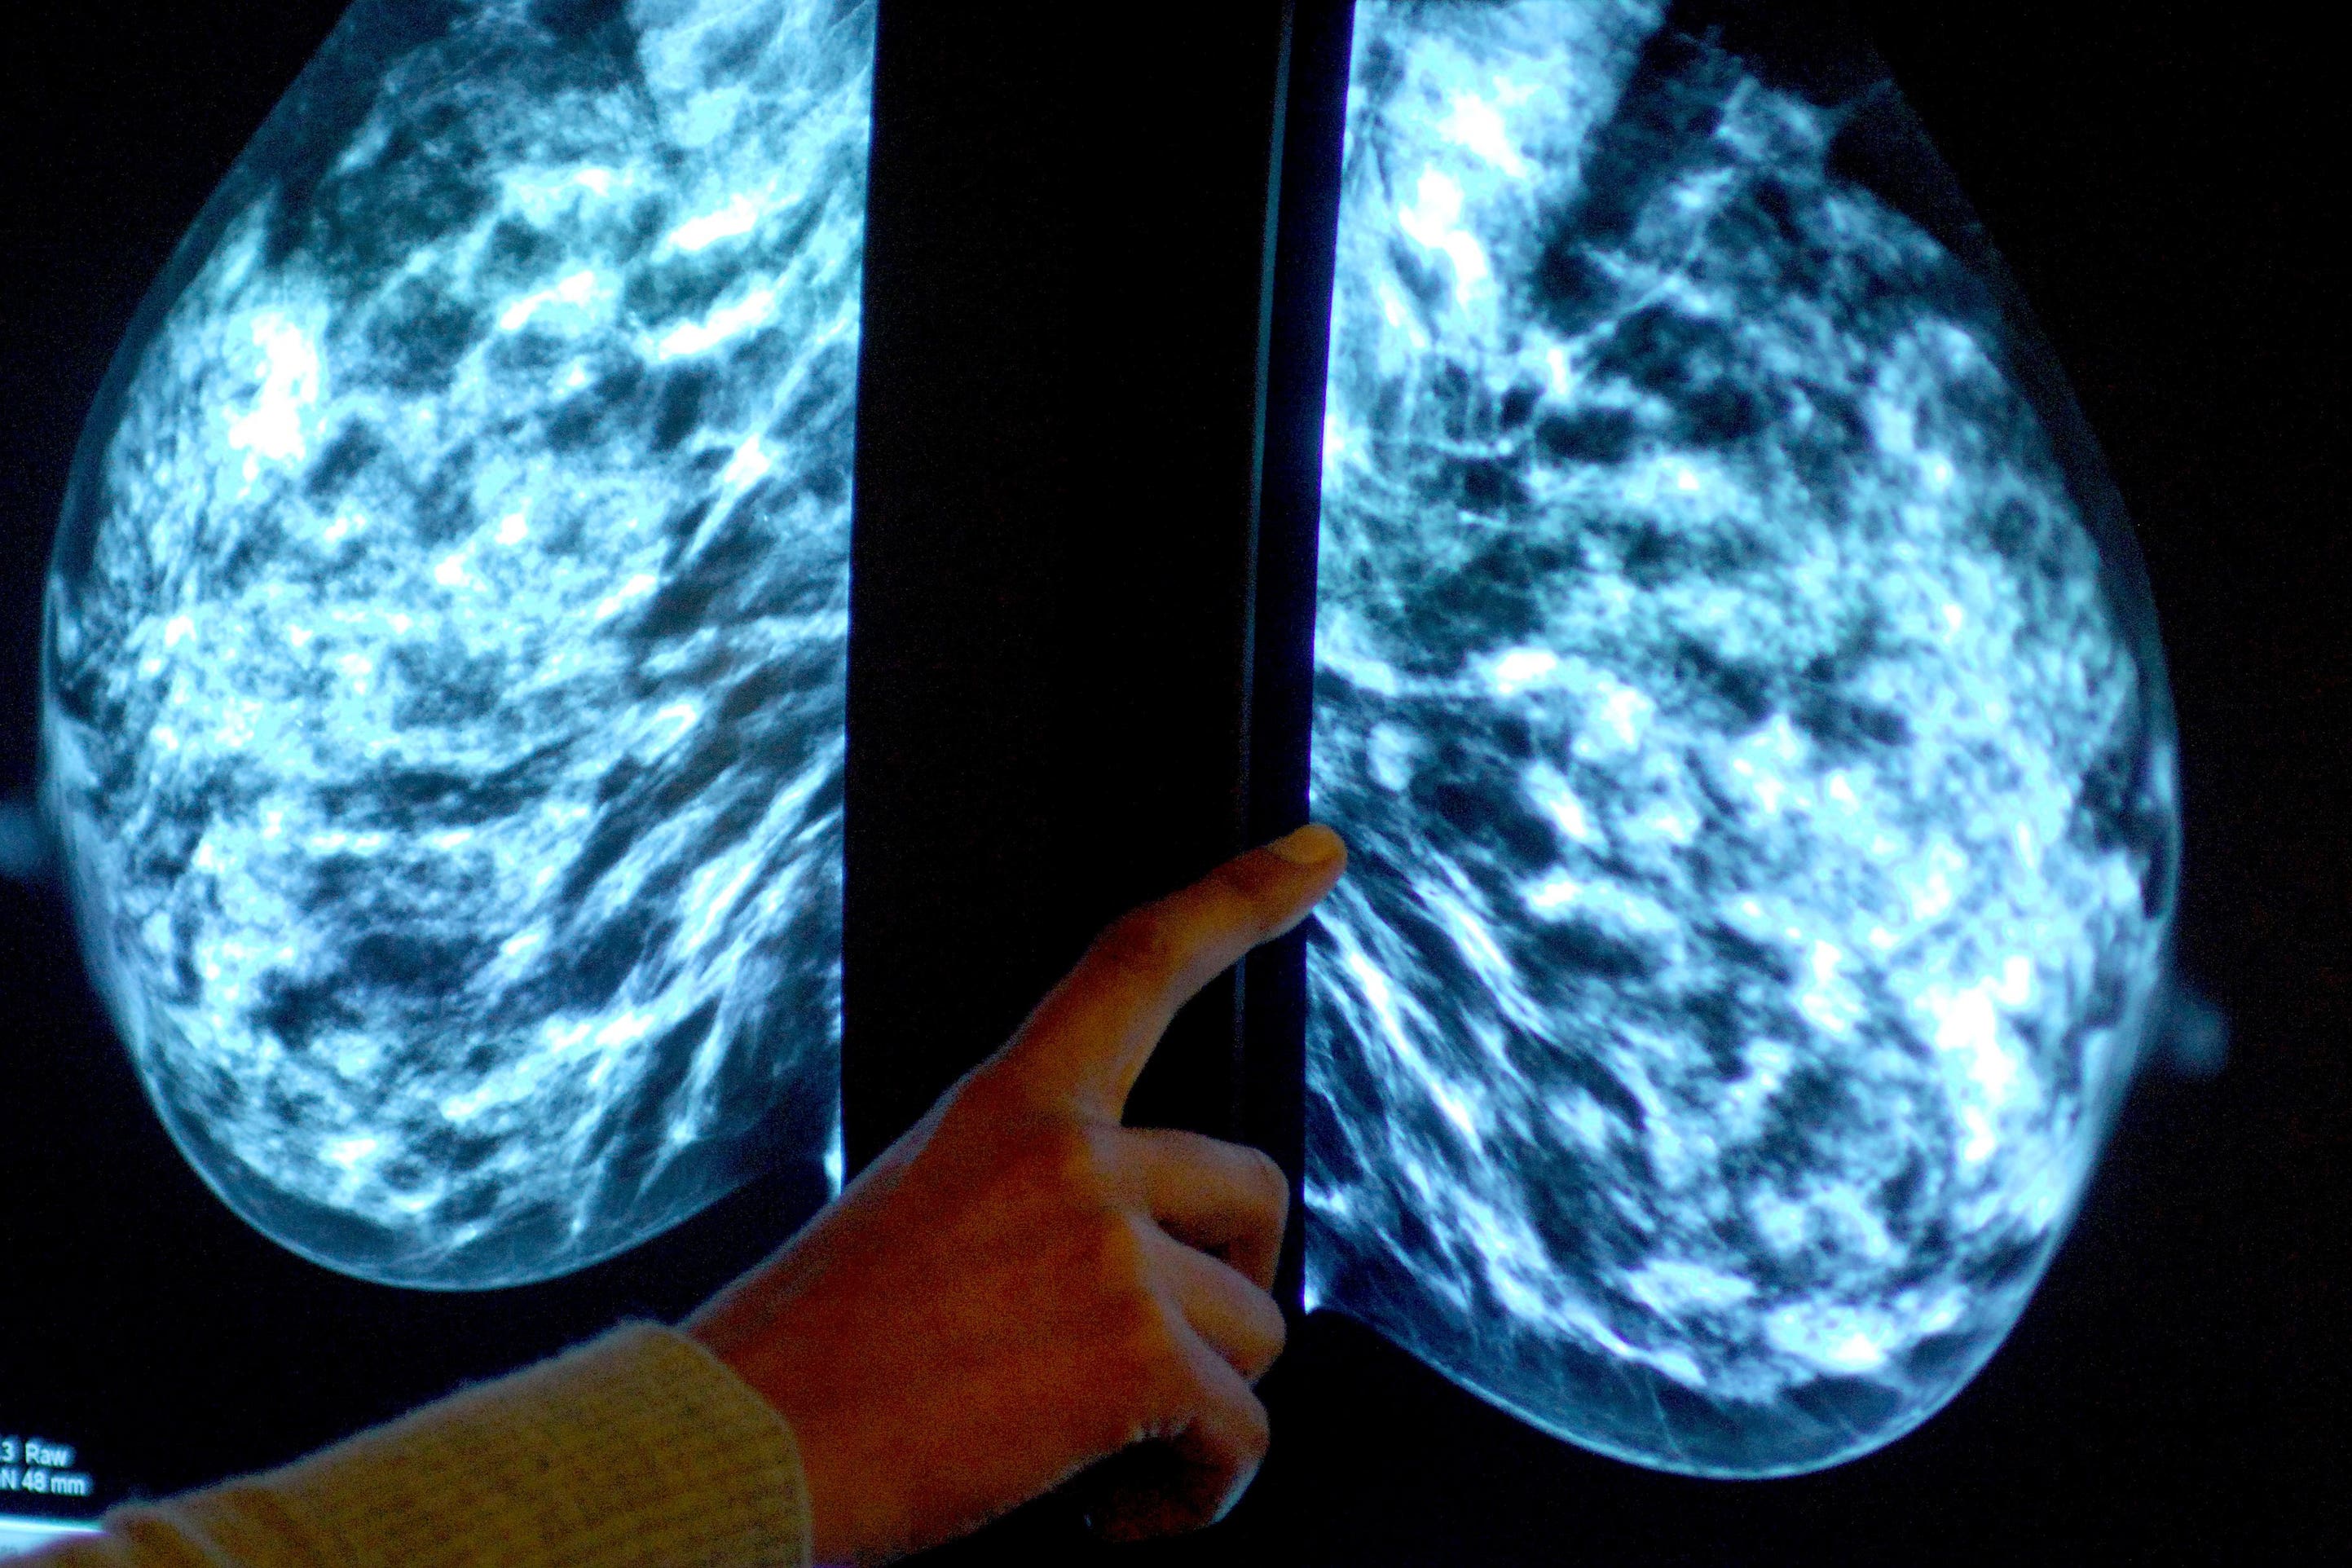 While it is already known that people who survive breast cancer are at higher risk of another primary cancer, the true risk has been unclear until now